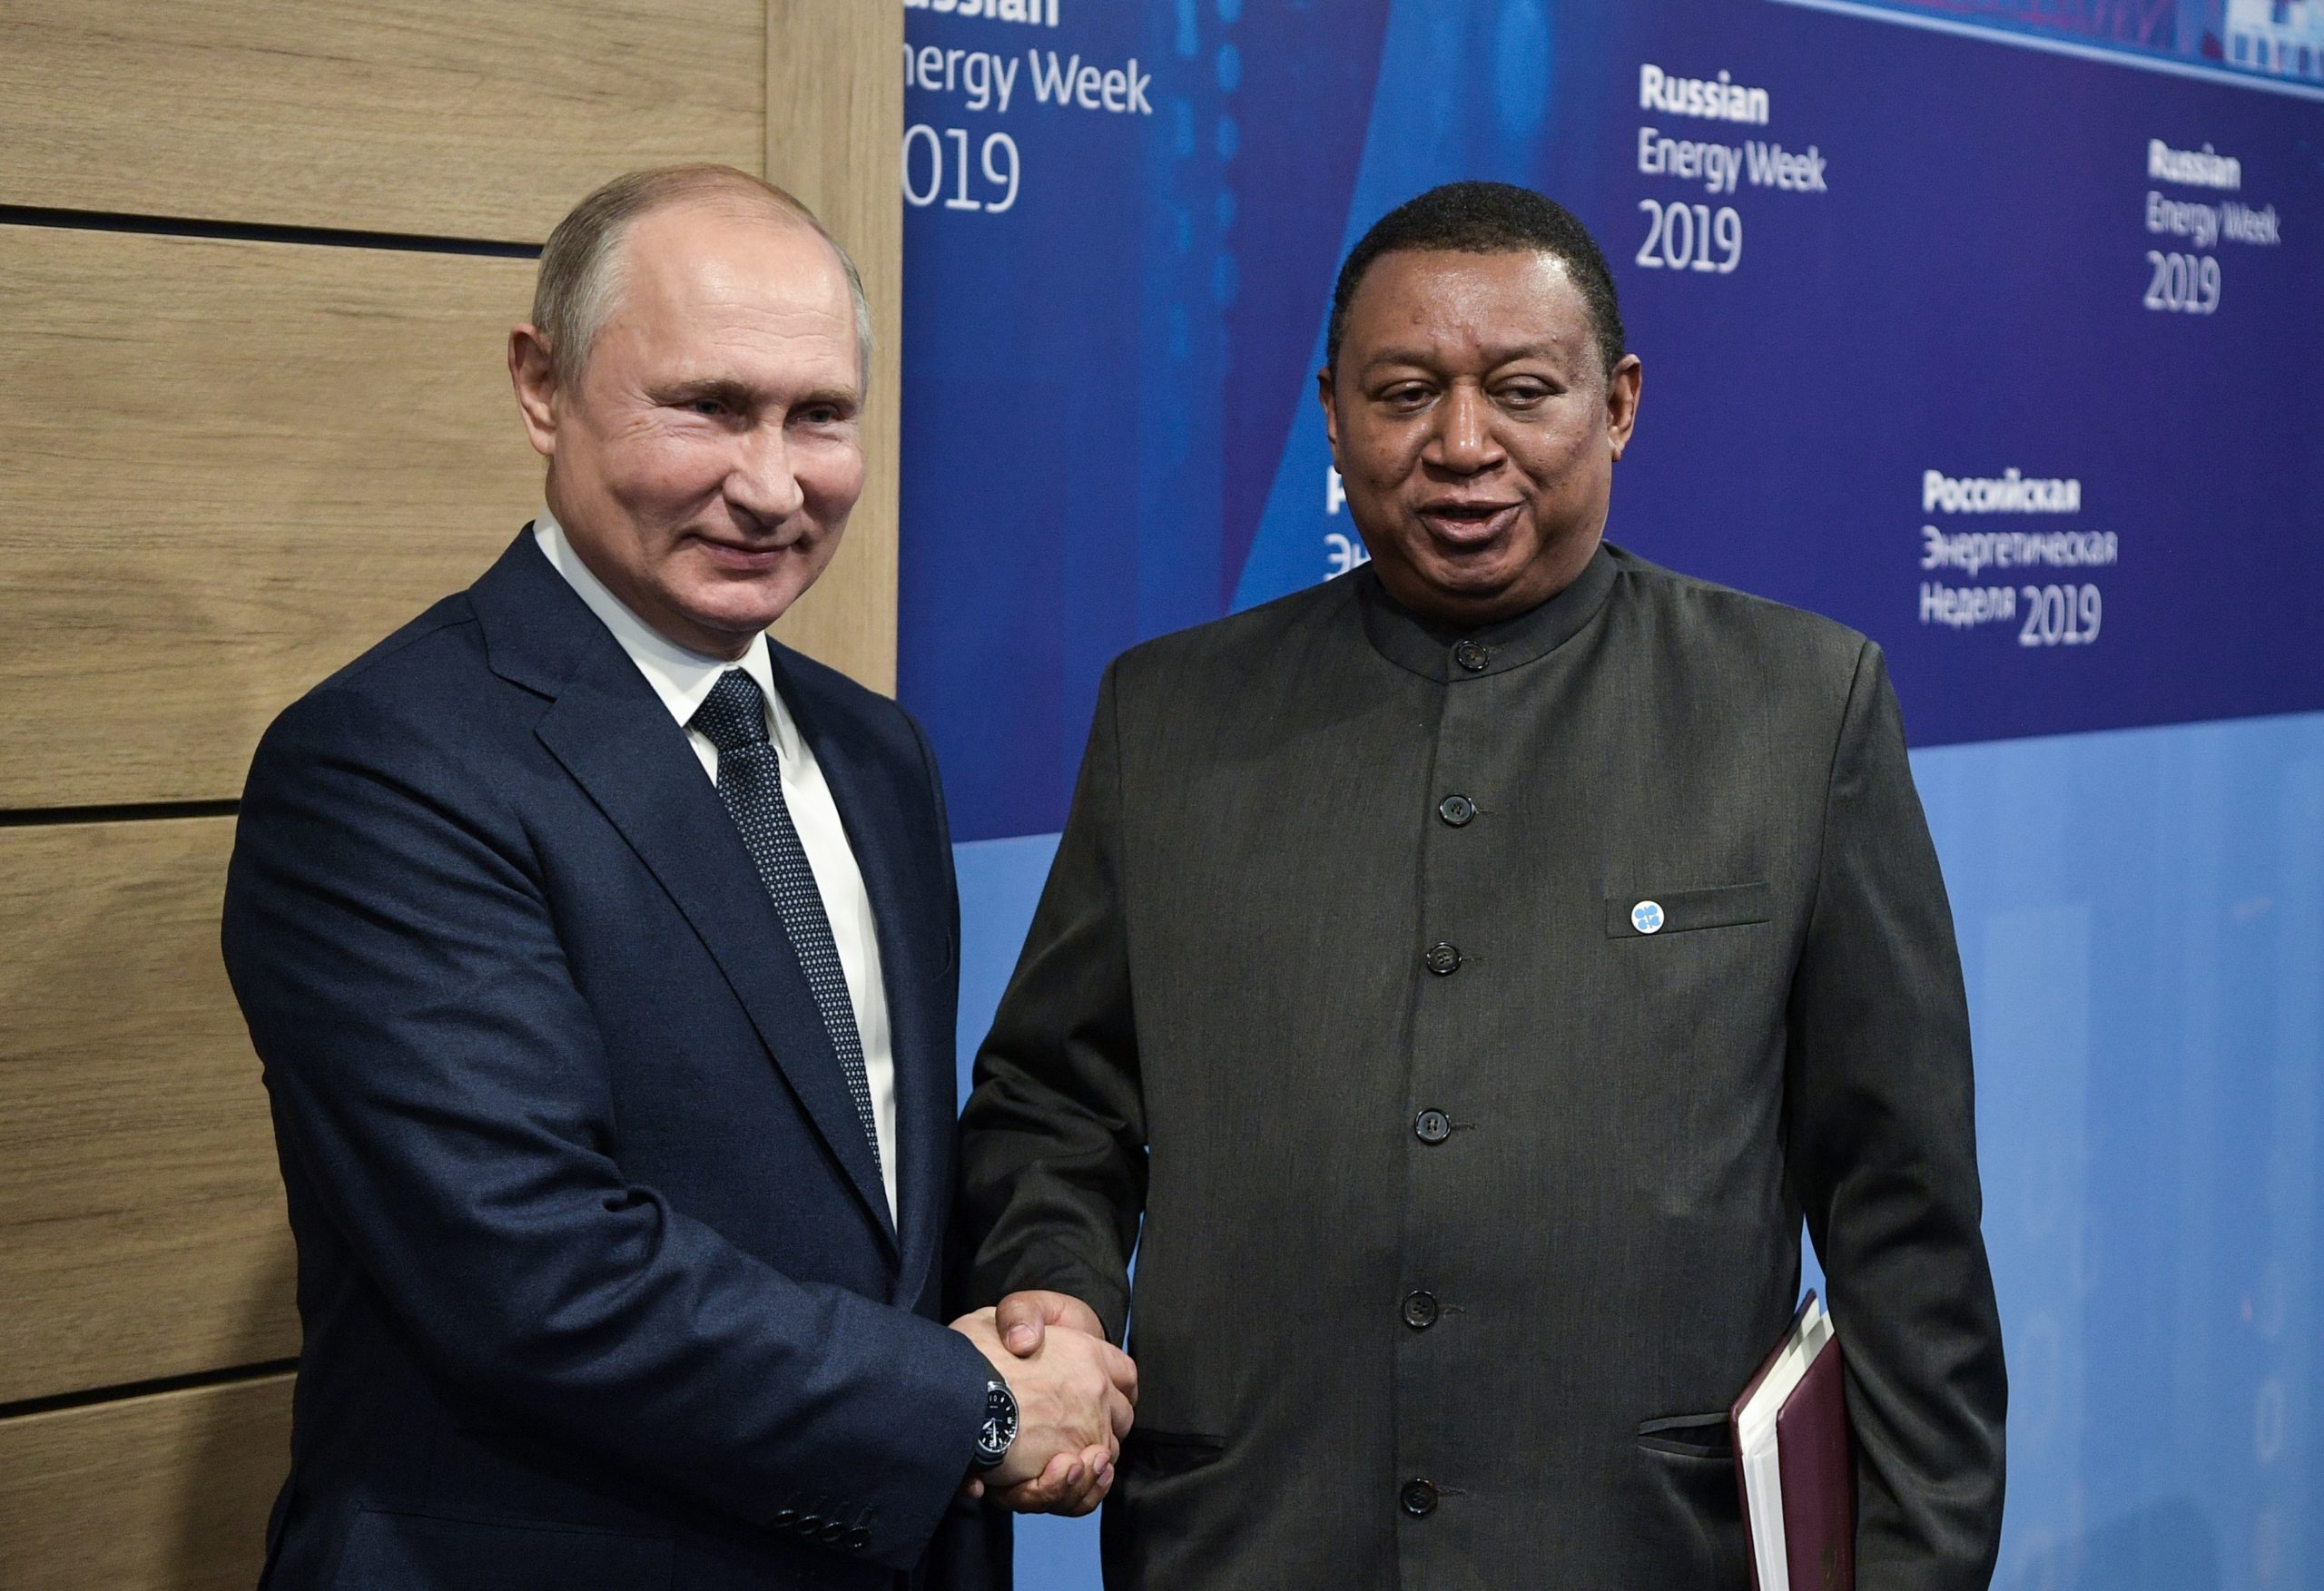 OPEC Secretary General Mohammed Barkindo shakes hands with Russian President Vladimir Putin during a 2019 meeting in Moscow. (Alexey Nikolsky/Sputnik/AFP via Getty Images)